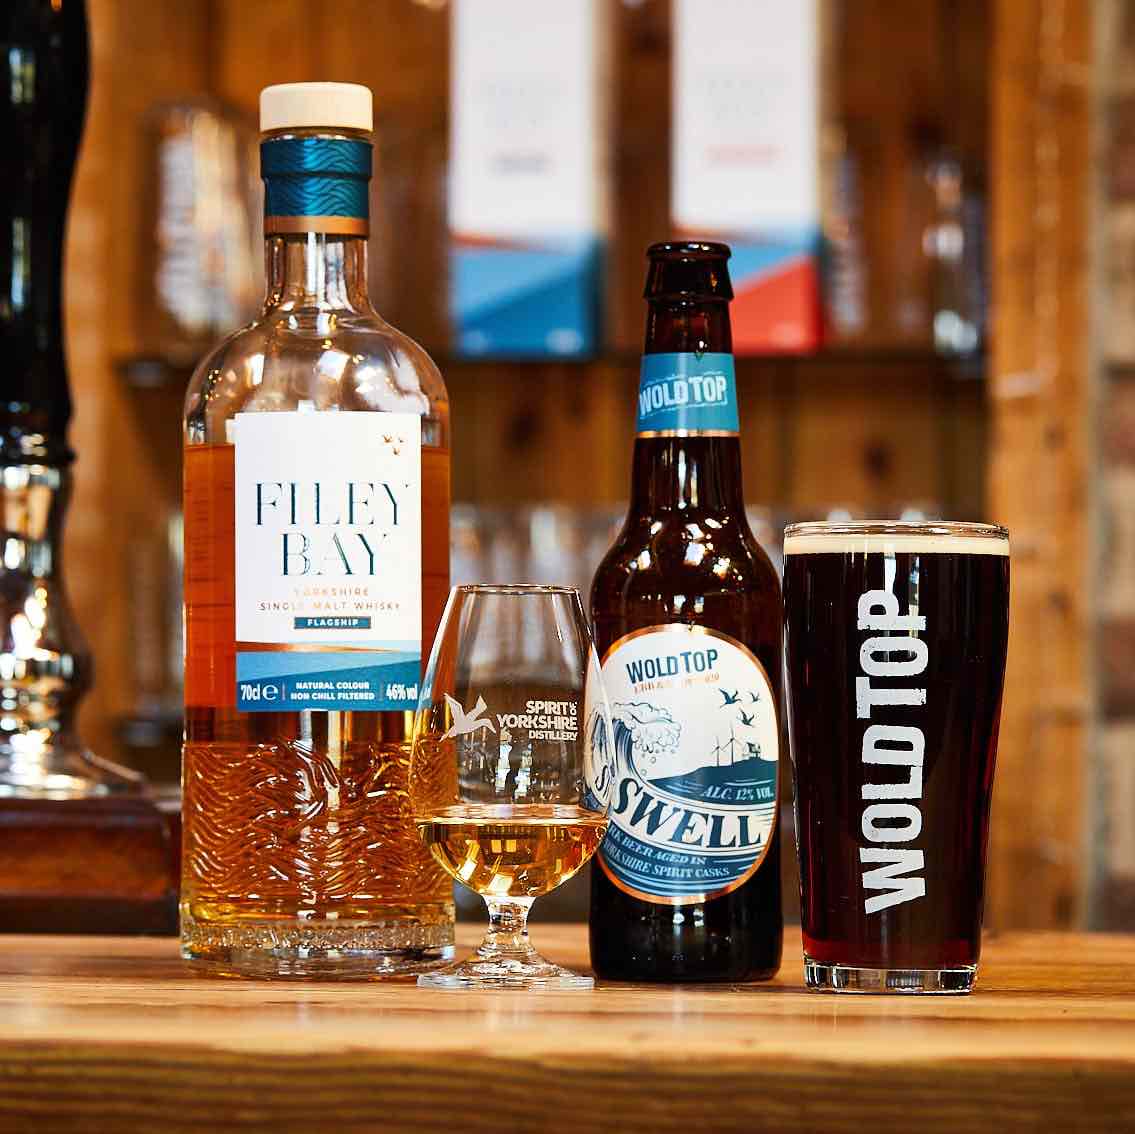 Filey Bay Whisky made at Spirit Of Yorkshire Distillery and Wold Top Brewery